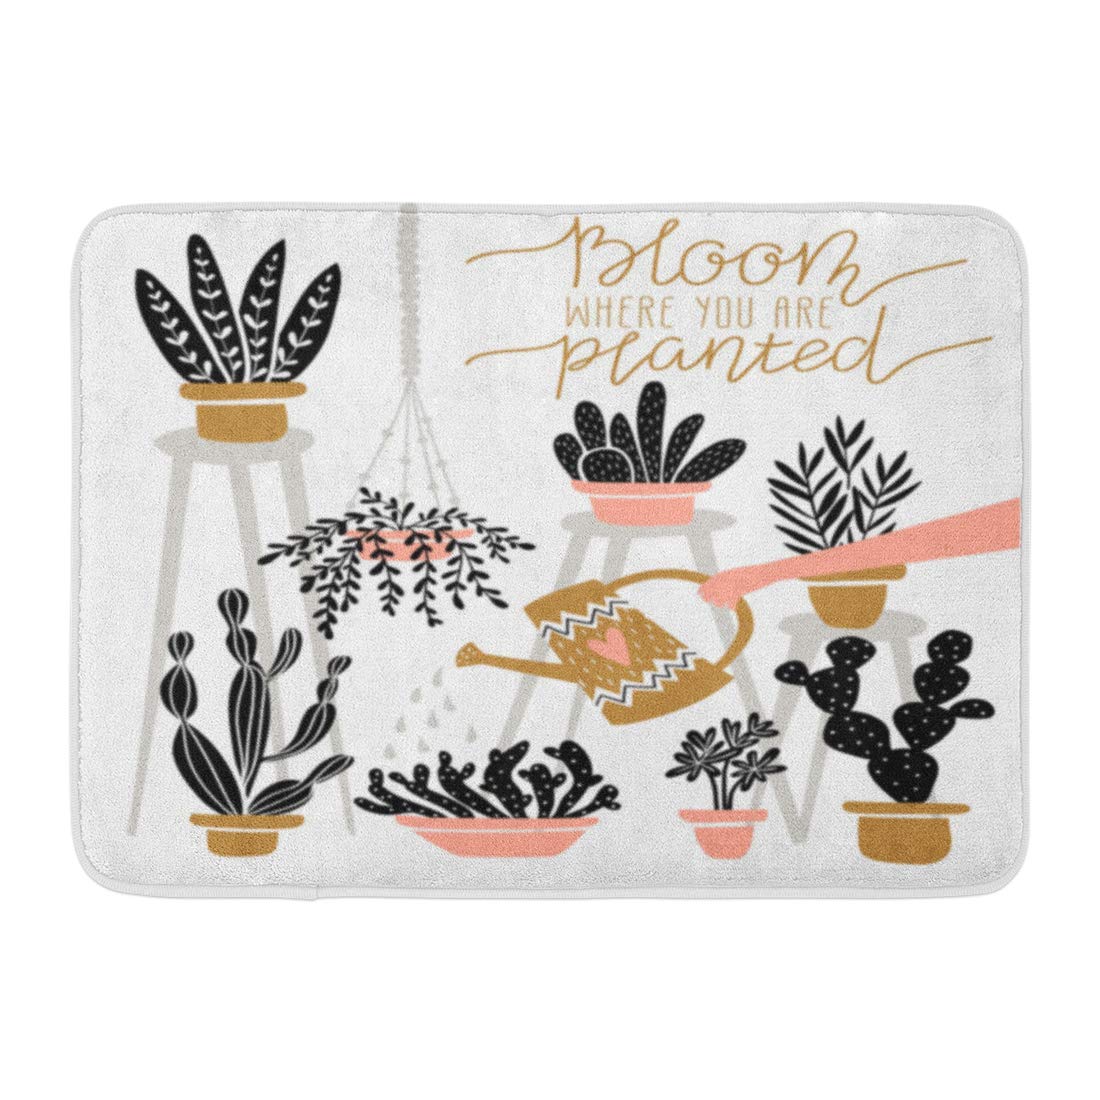 GODPOK Green Hand Various Indoor Plants in Pots with Lettering 'Bloom Where You are Planted' Great for Gardening Rug Doormat Bath Mat 23.6x15.7 inch - image 1 of 1